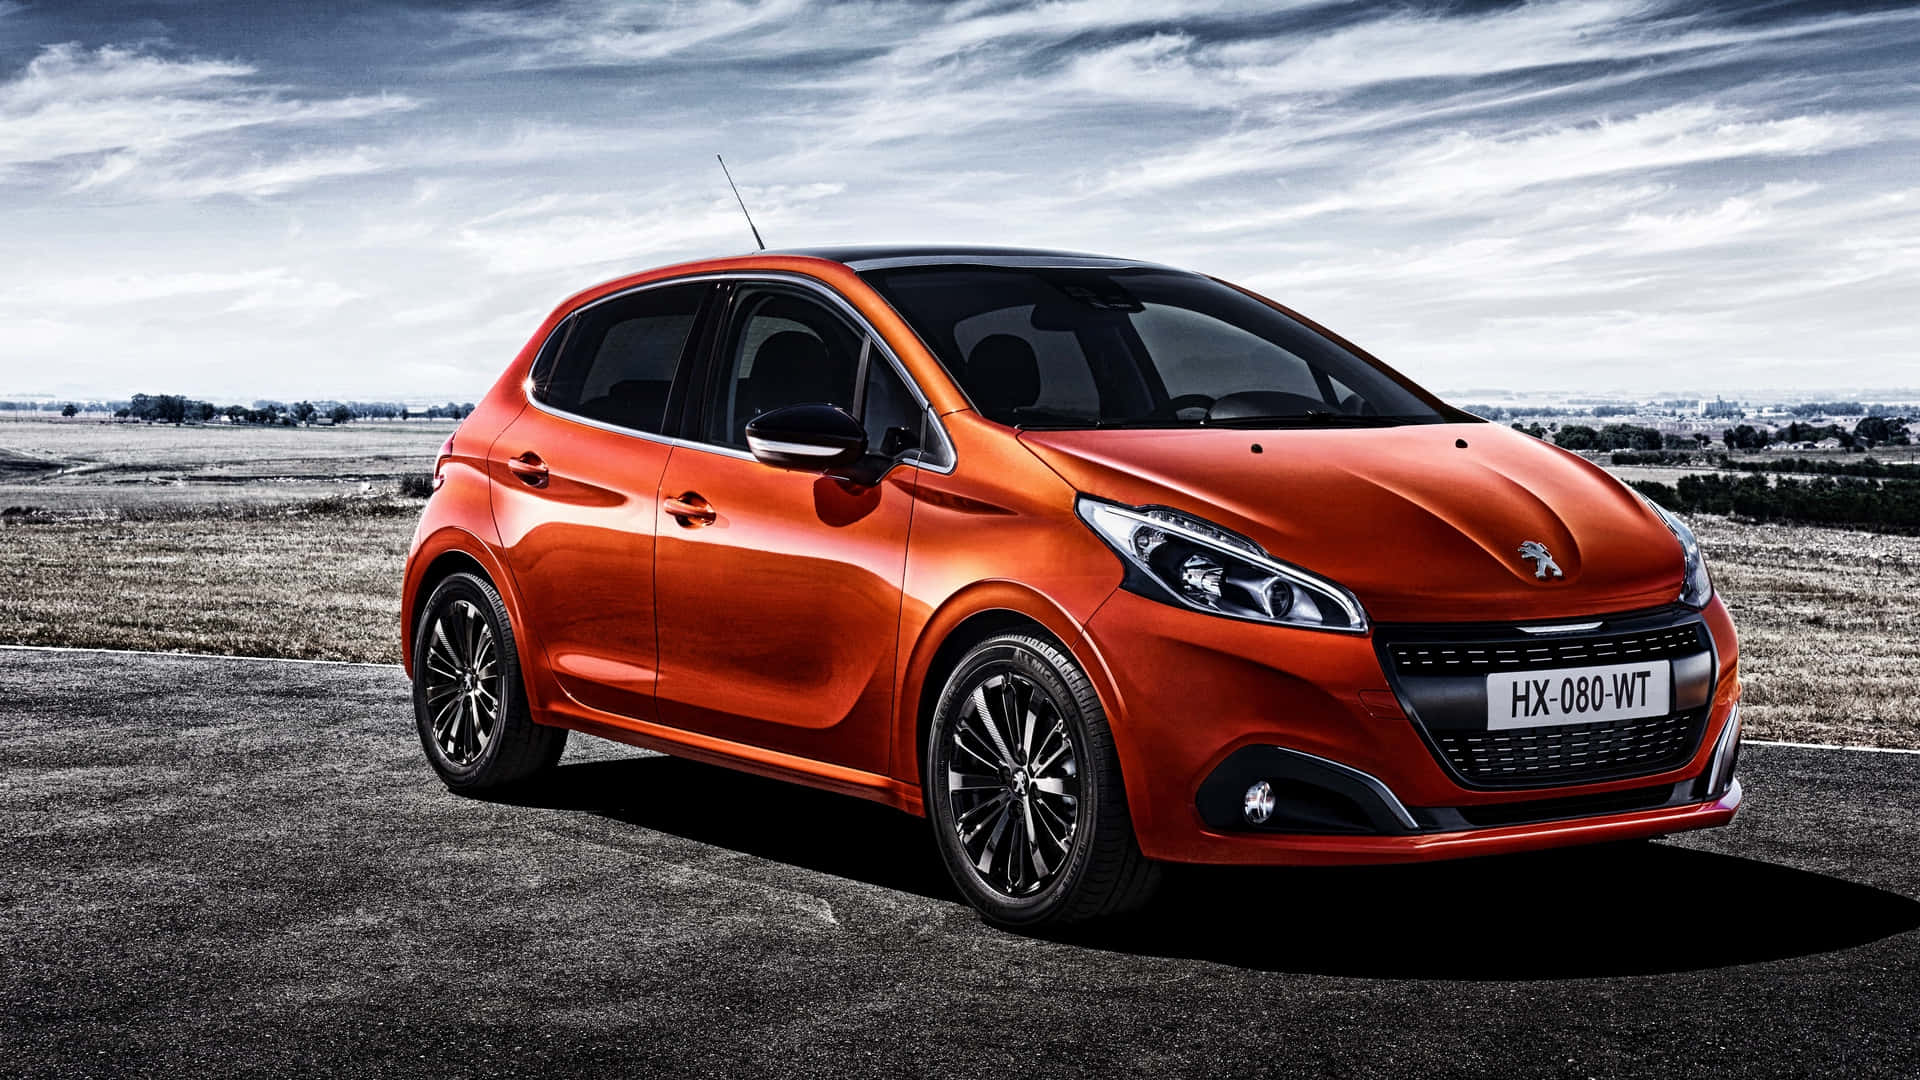 Caption: Sleek and Stylish Peugeot 208 in Action Wallpaper